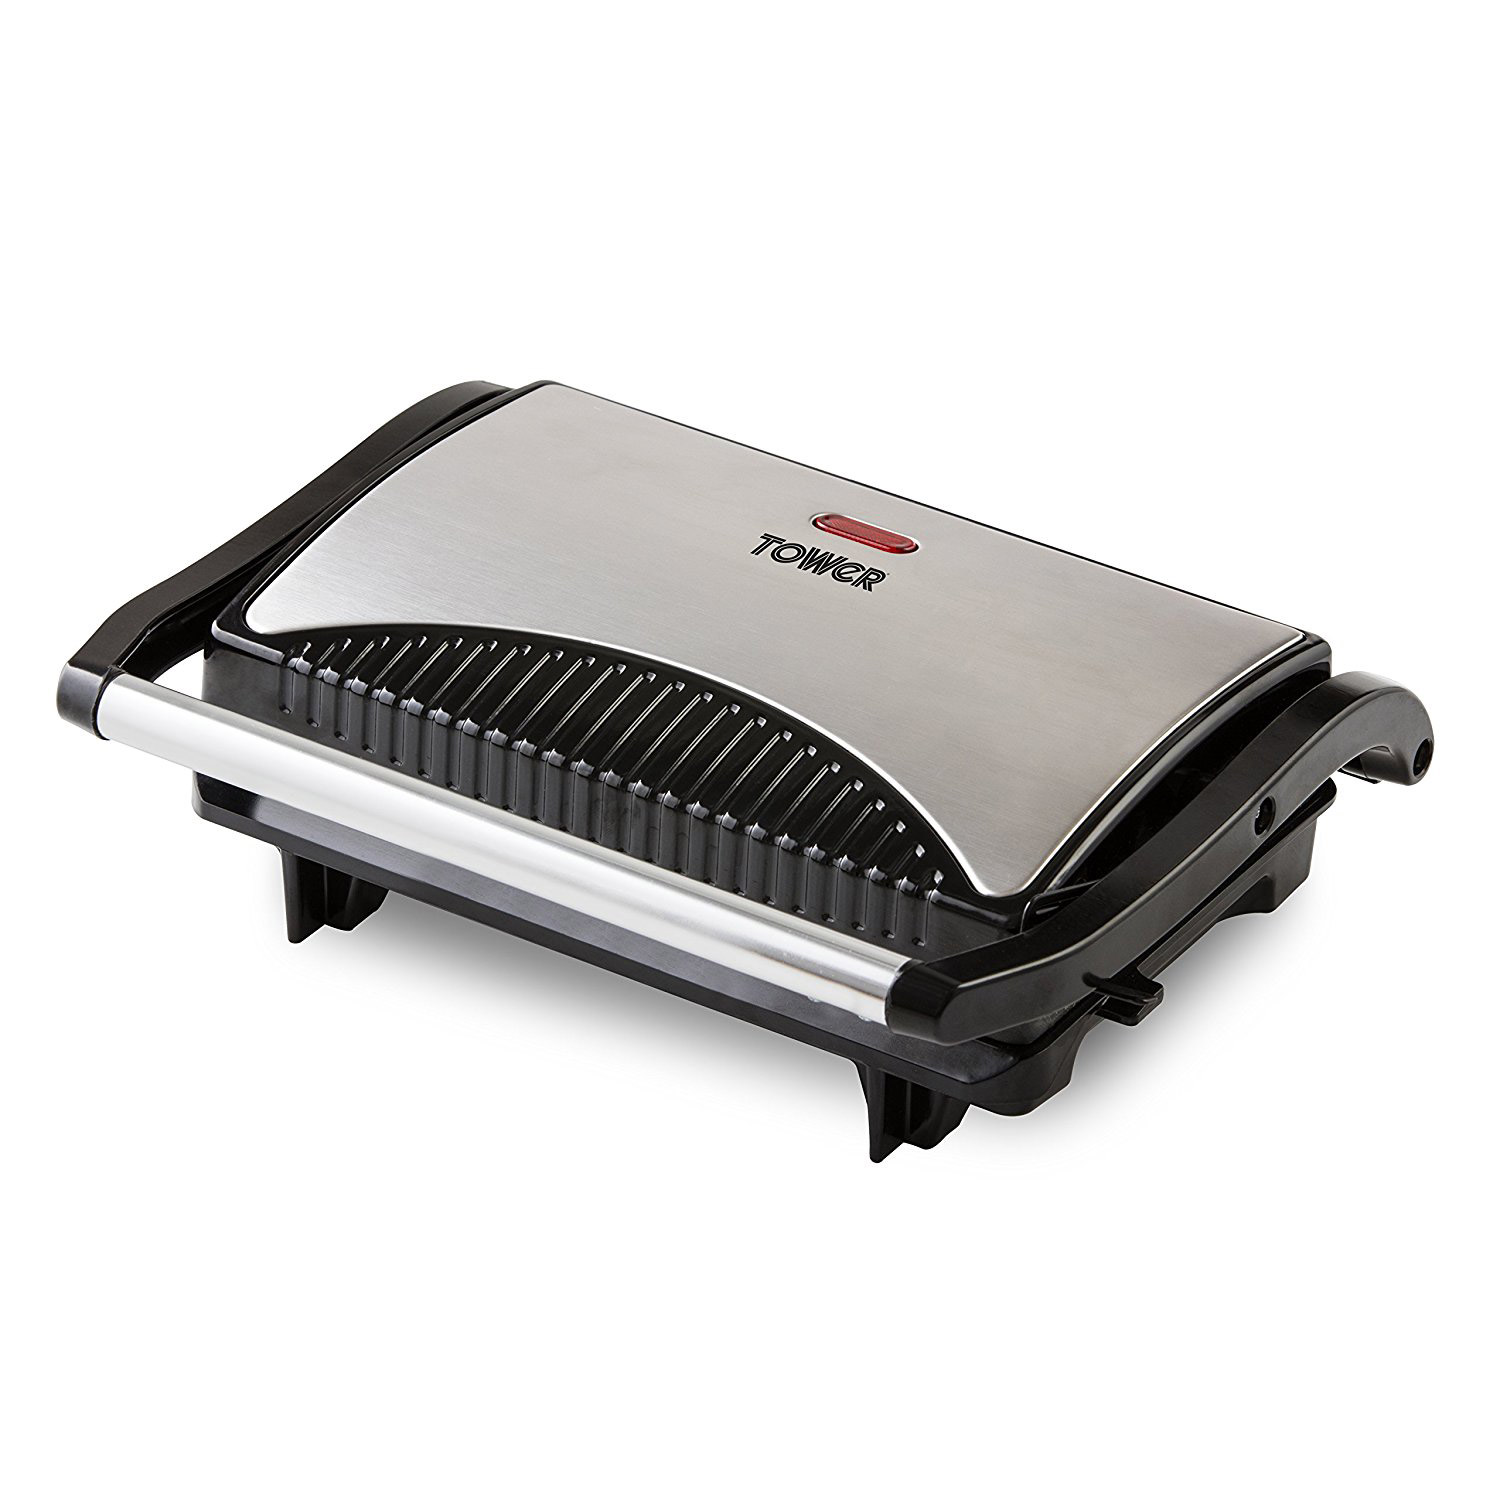 Image of Tower T27019 Panini Sandwich Press in Stainless Steel Black 700W